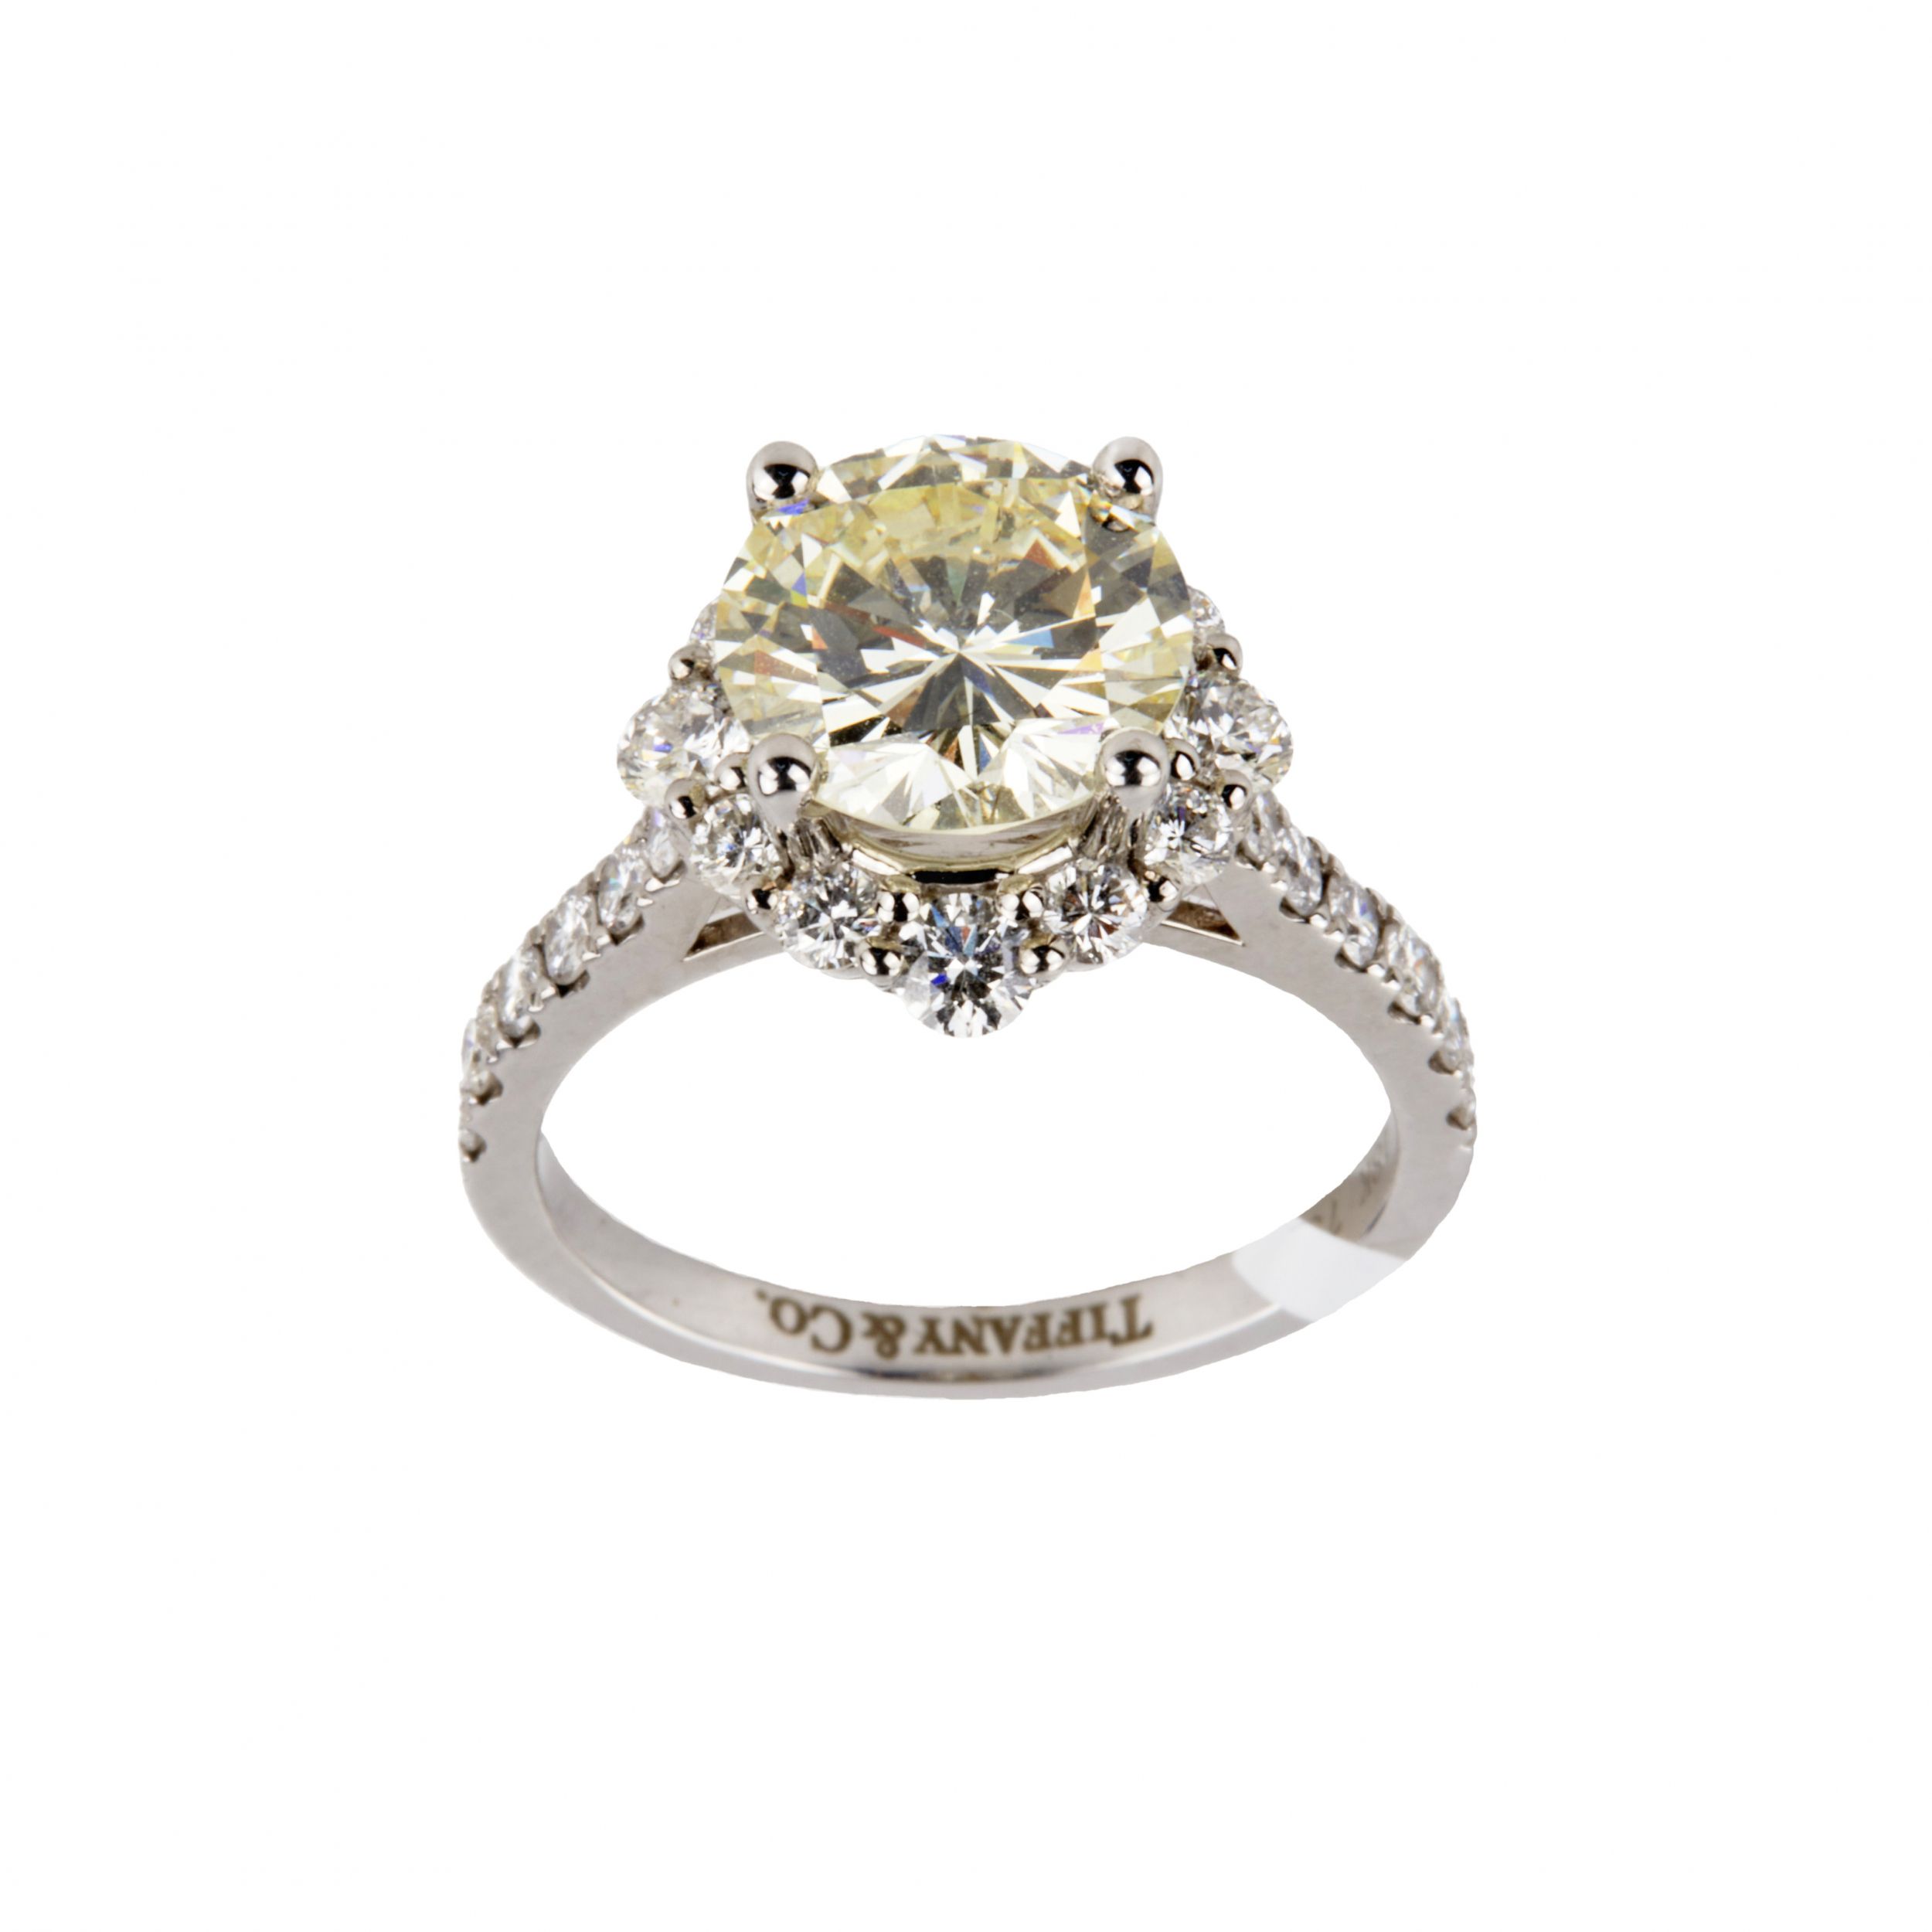 Engagement-gold-ring-with-diamonds-